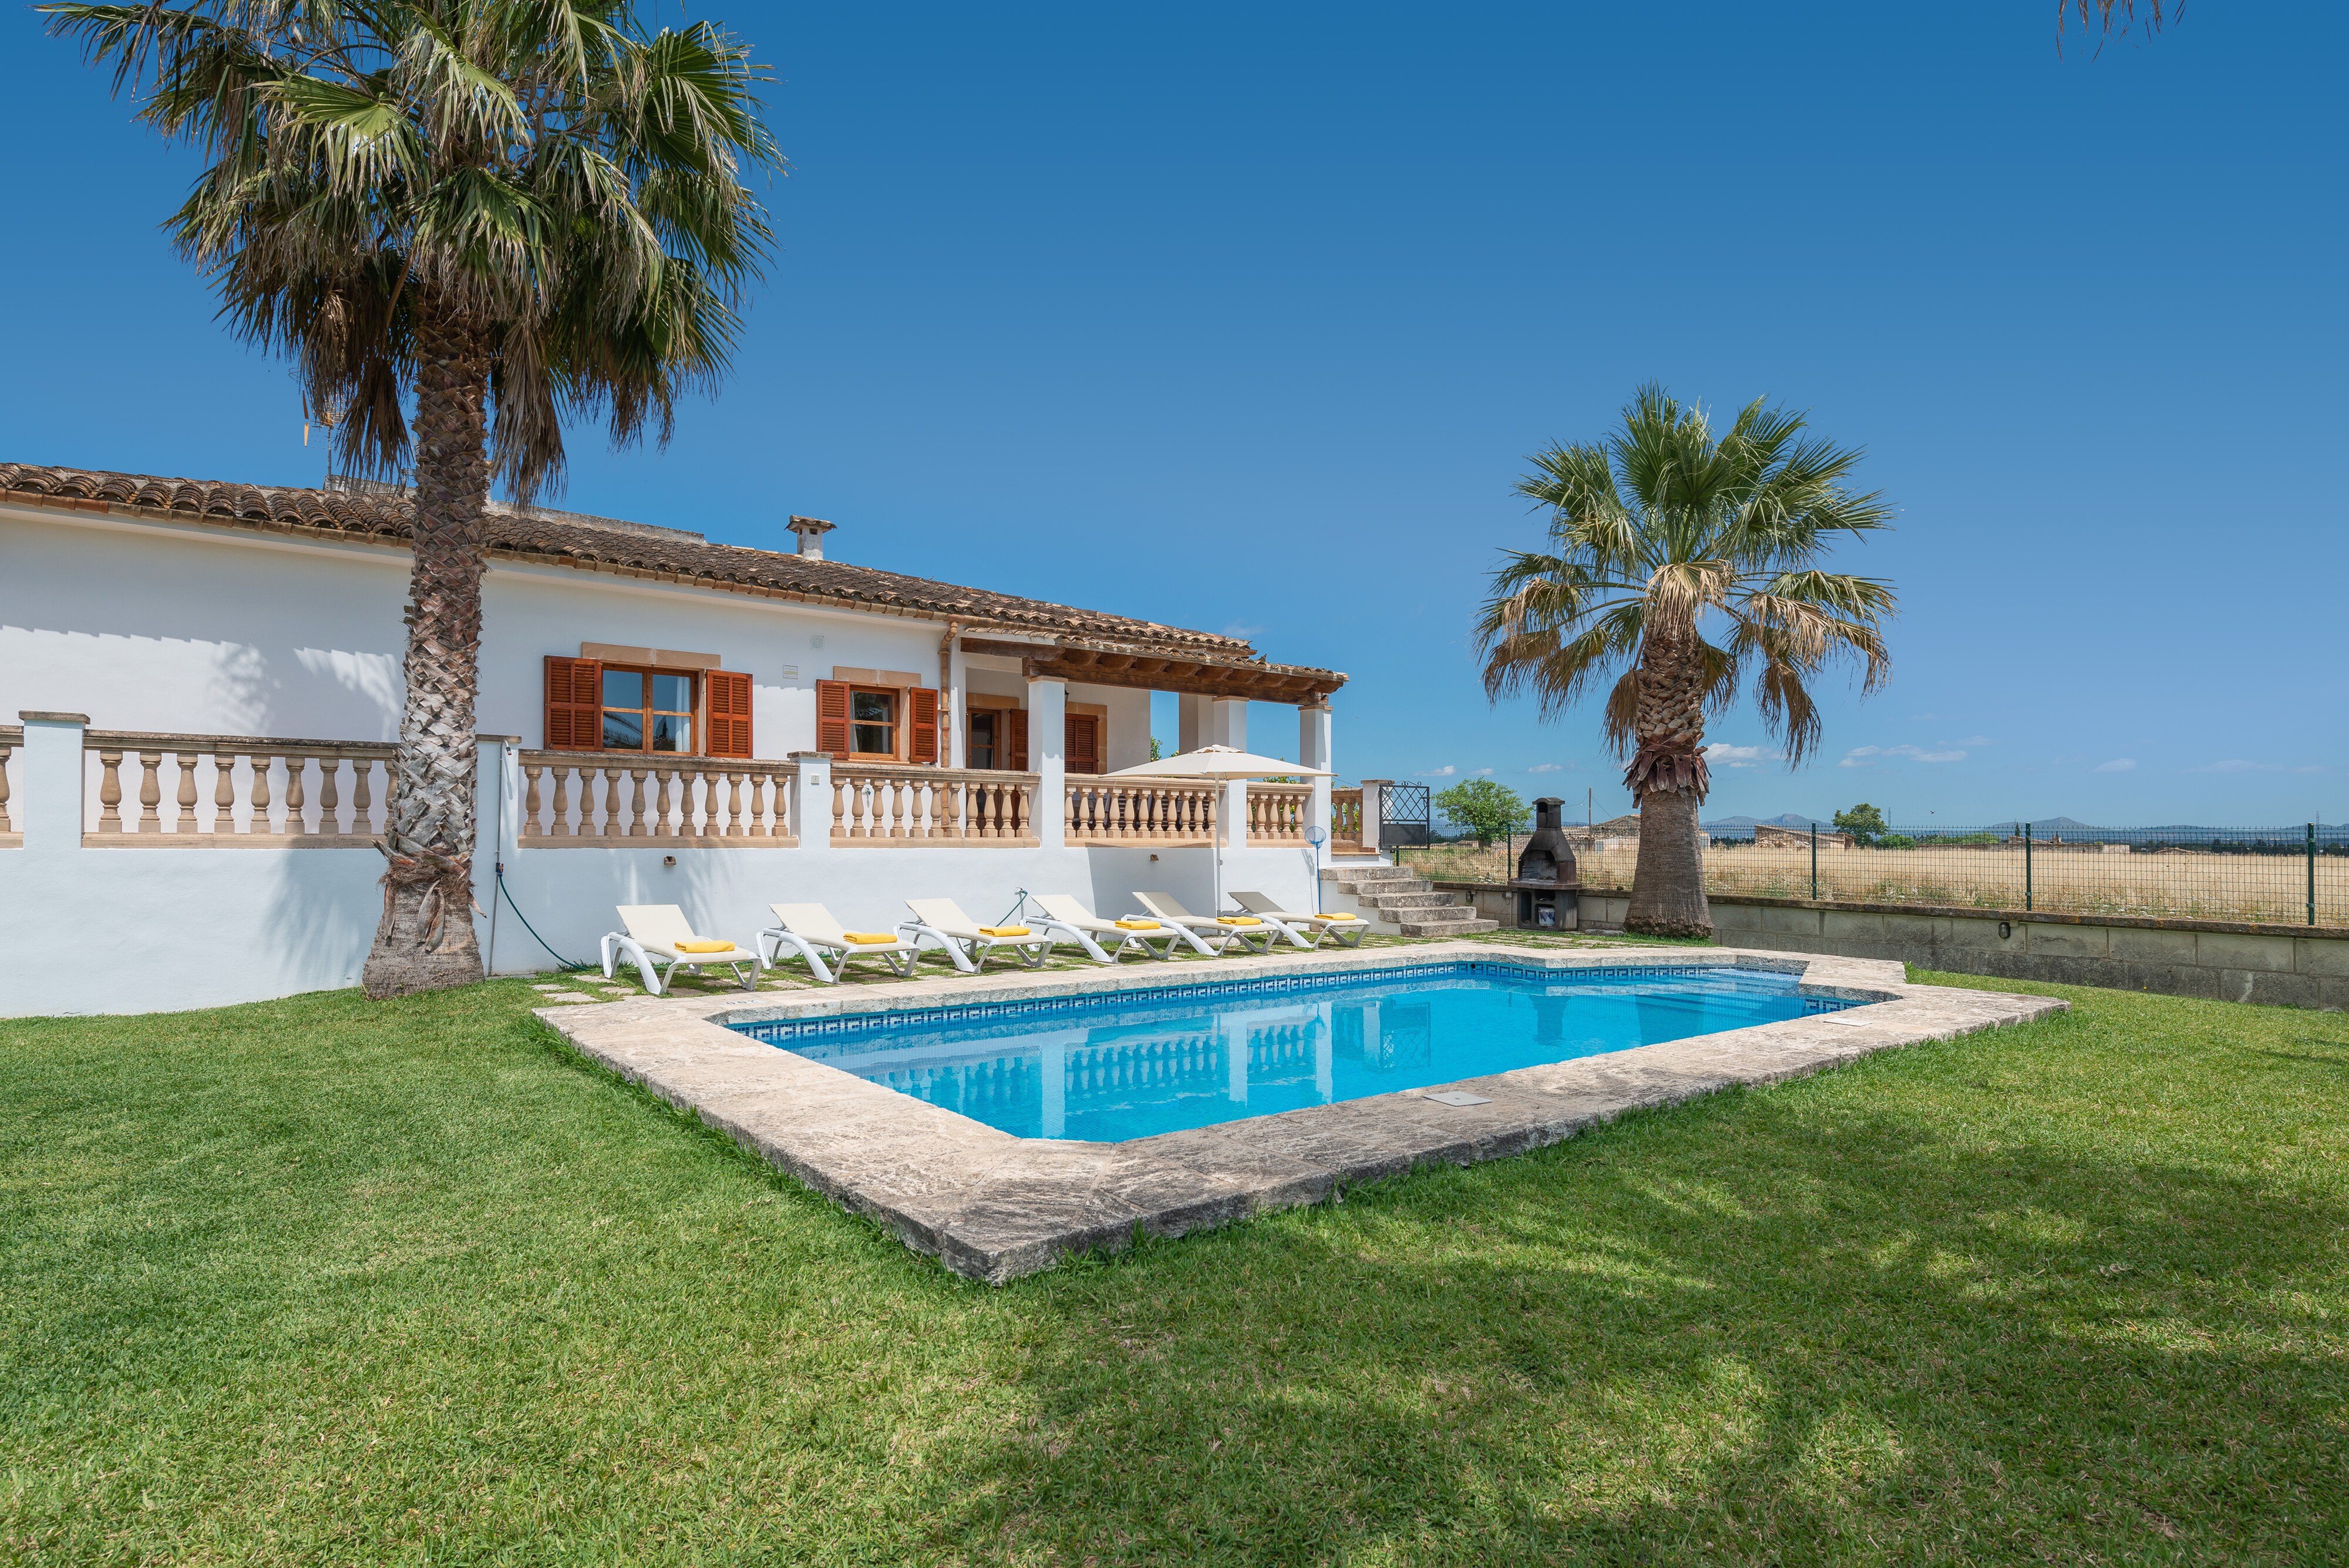 Property Image 2 - Villa Can Mussol with pool in Mallorca